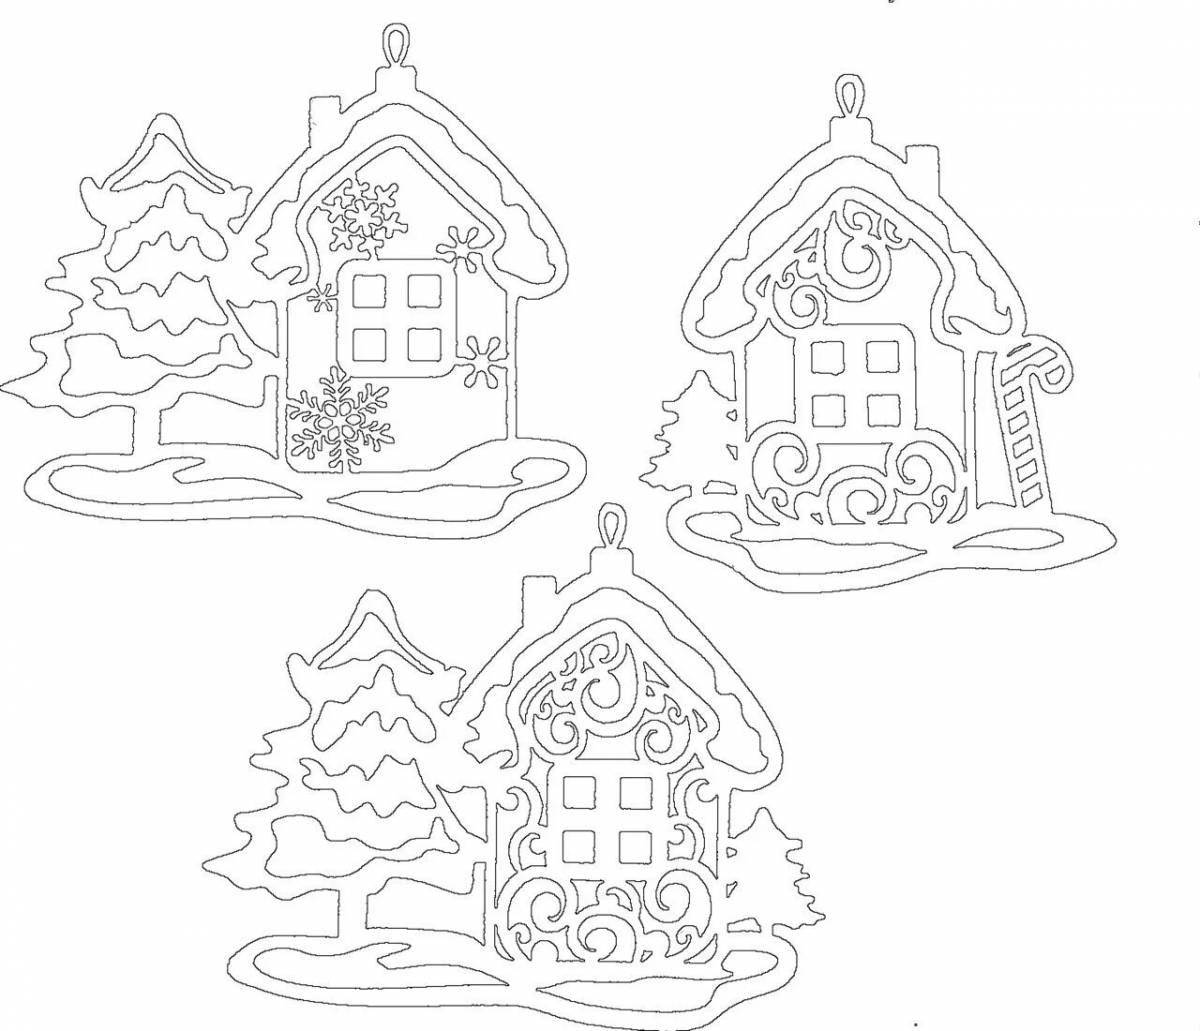 Coloring page charming bast and ice hut